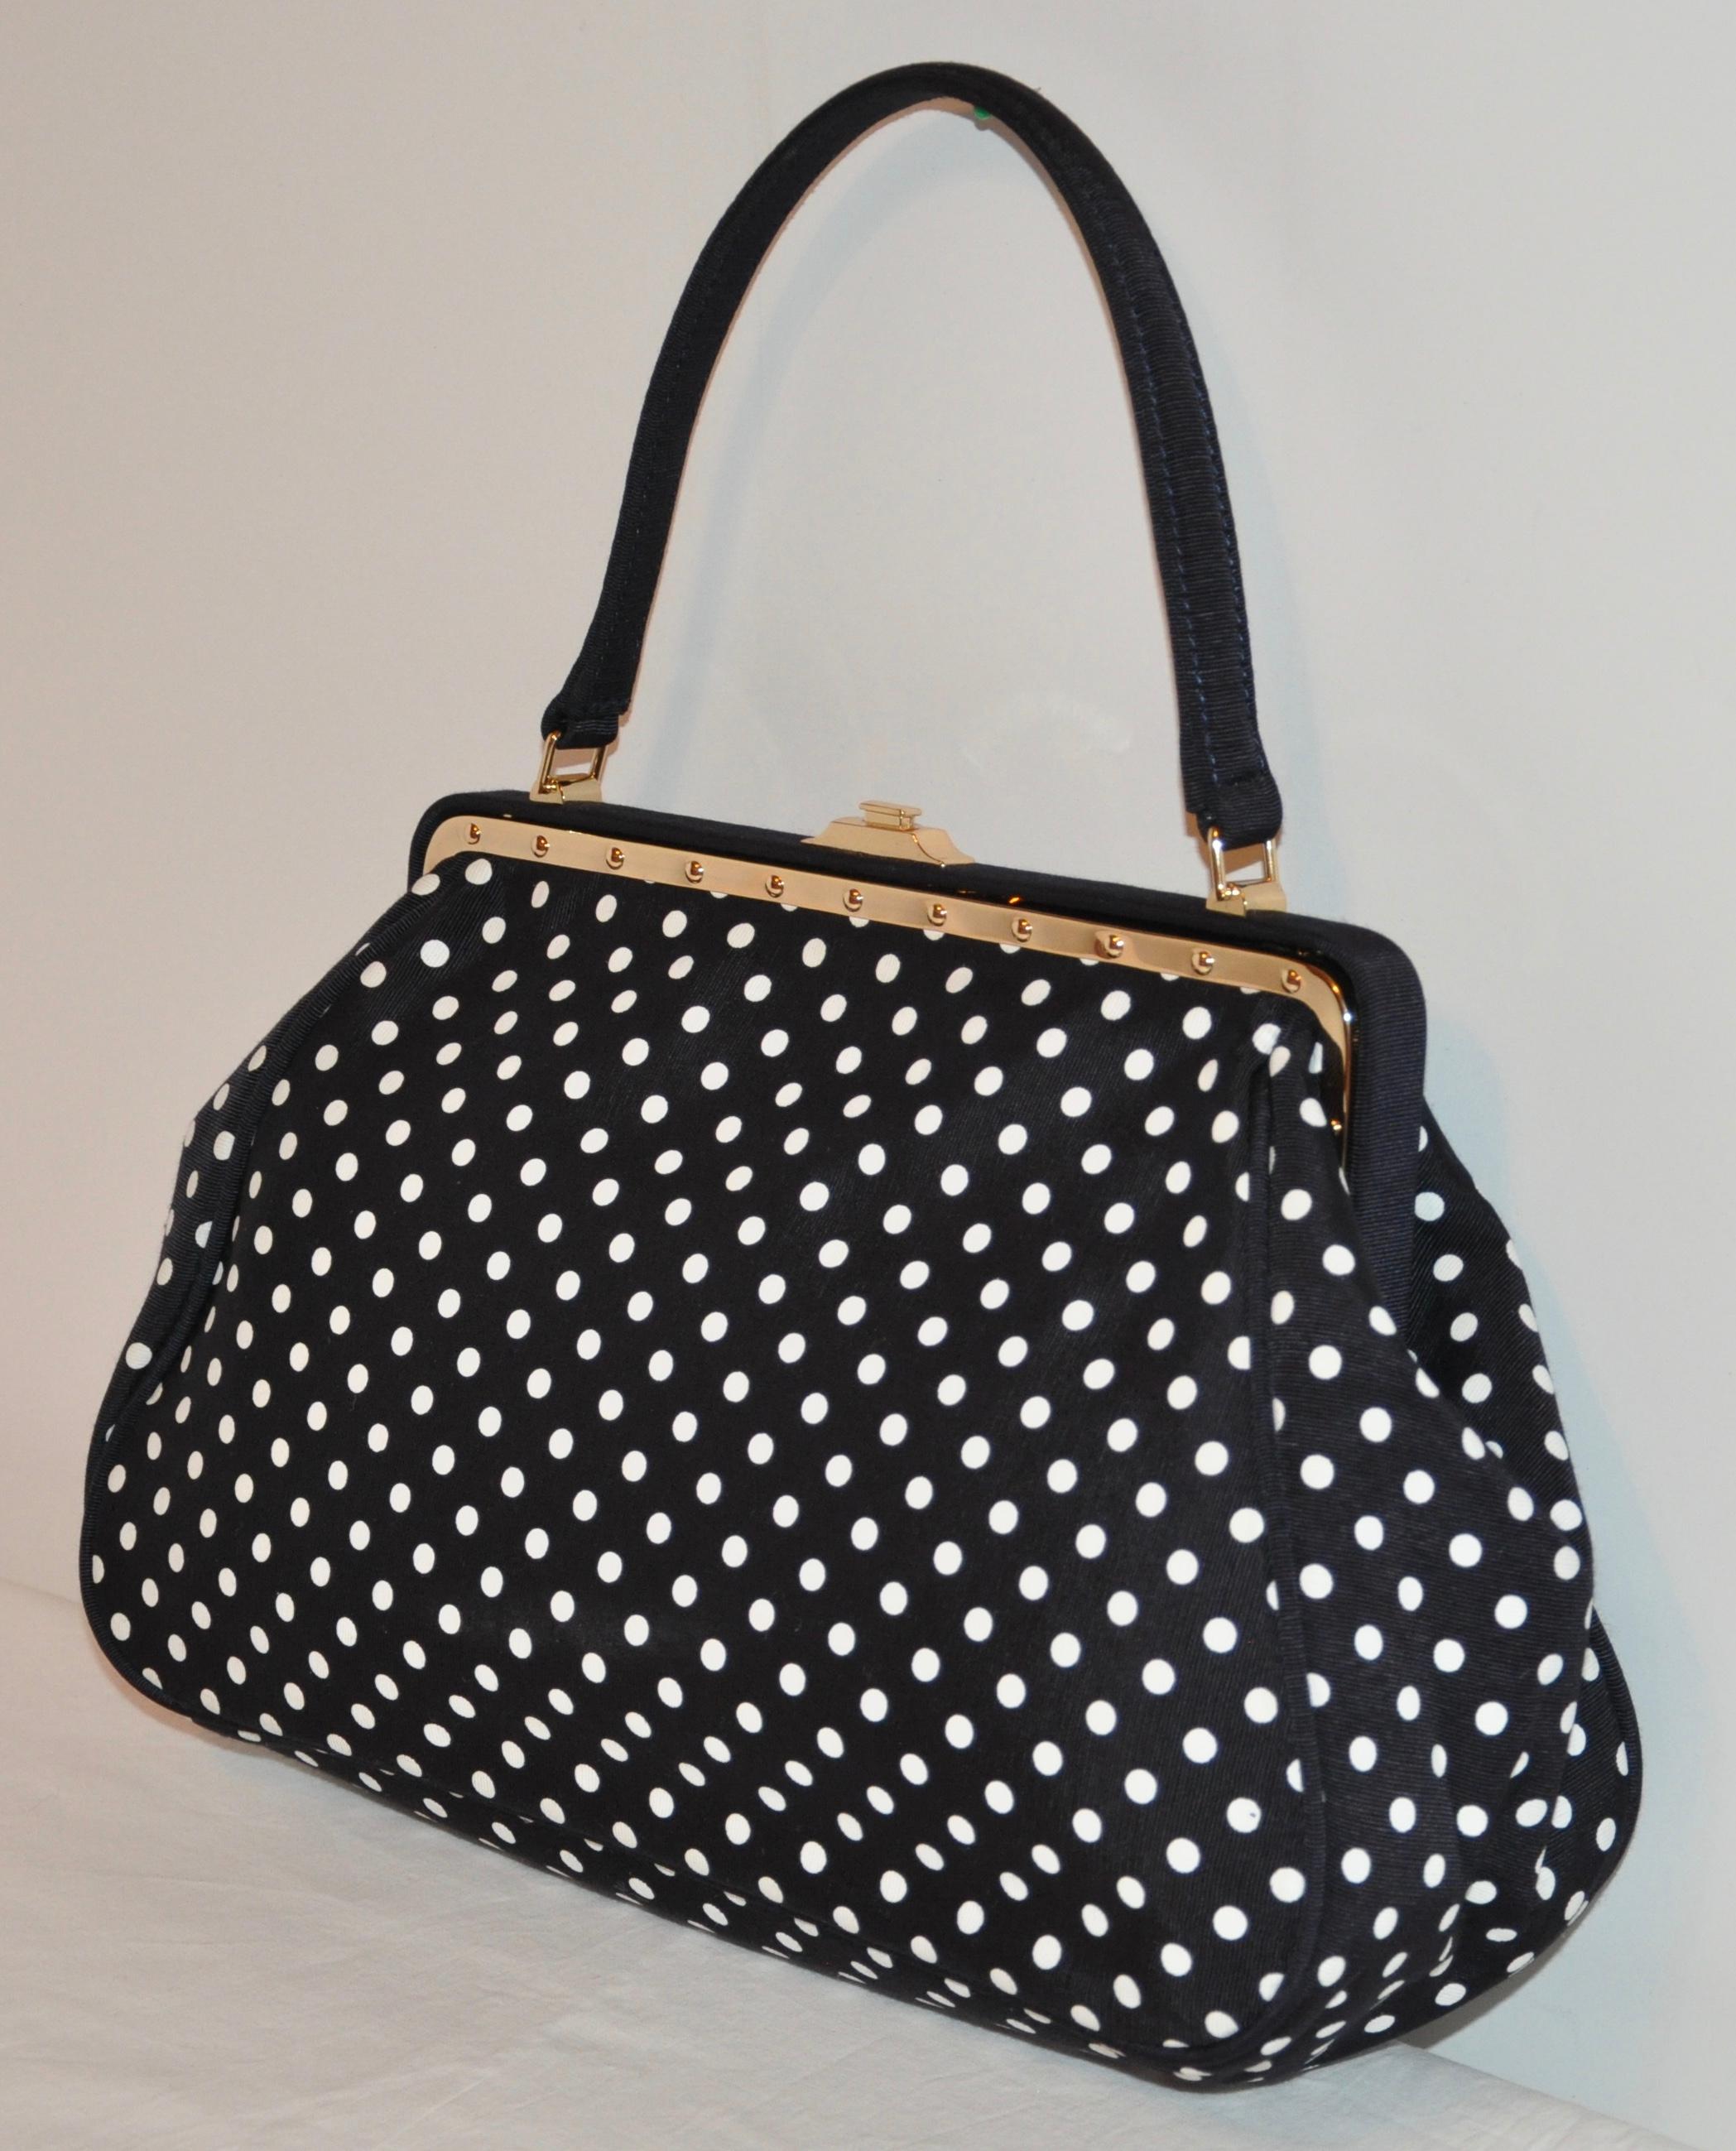 Moschino Black with White Polka Dot and Gilded Gold Hardware Accent Handbag For Sale 2